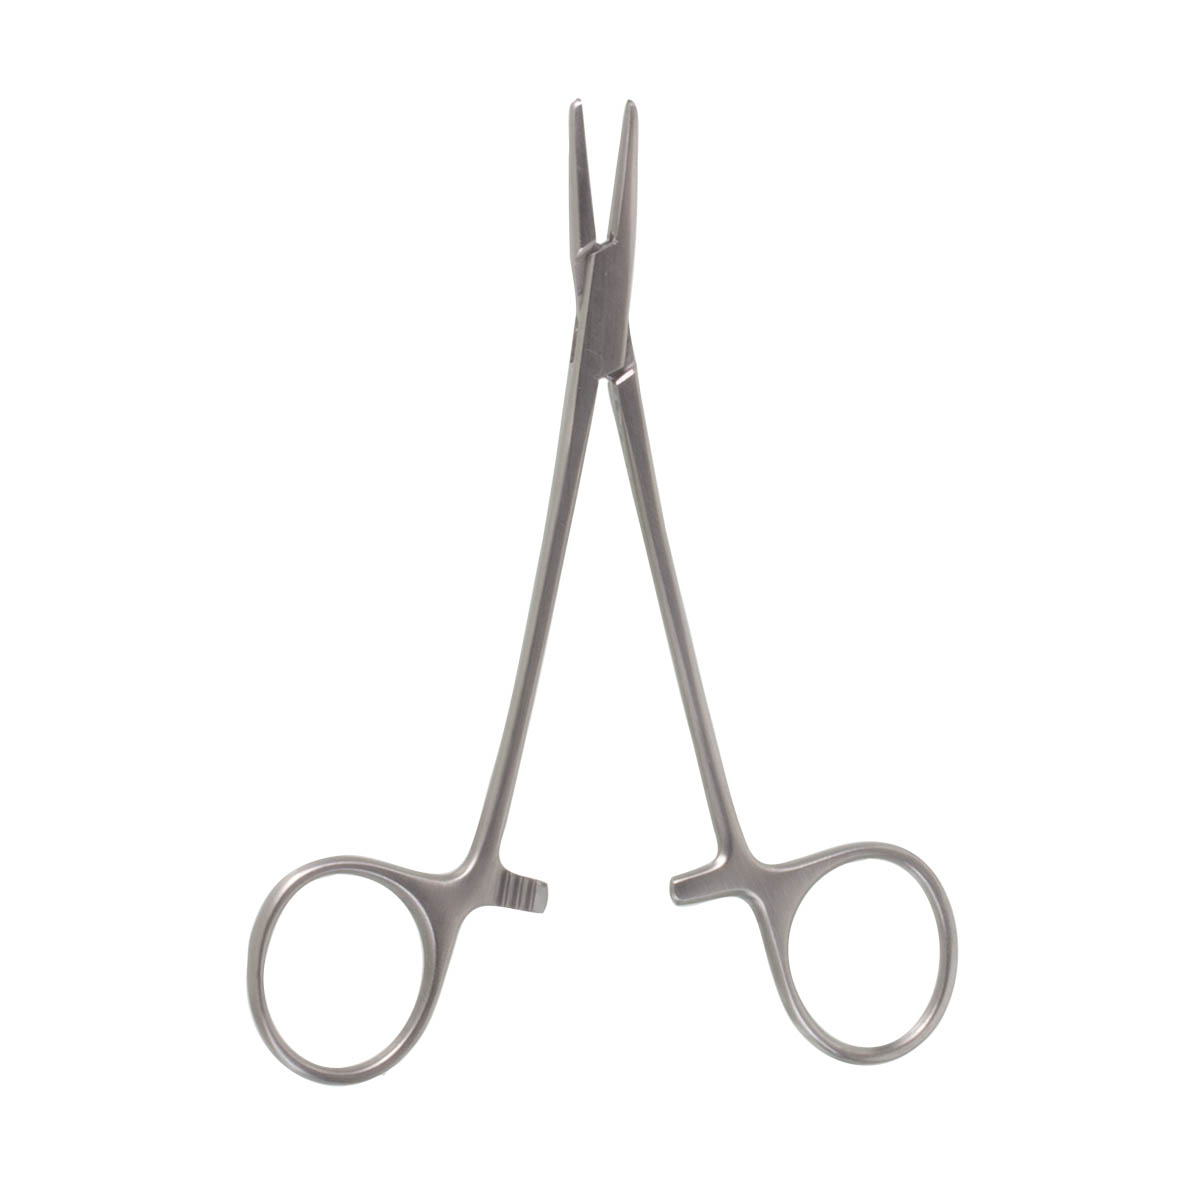 6018] Webster Needle Holder - Smooth - 5 - 50 Count – Trinity Sterile